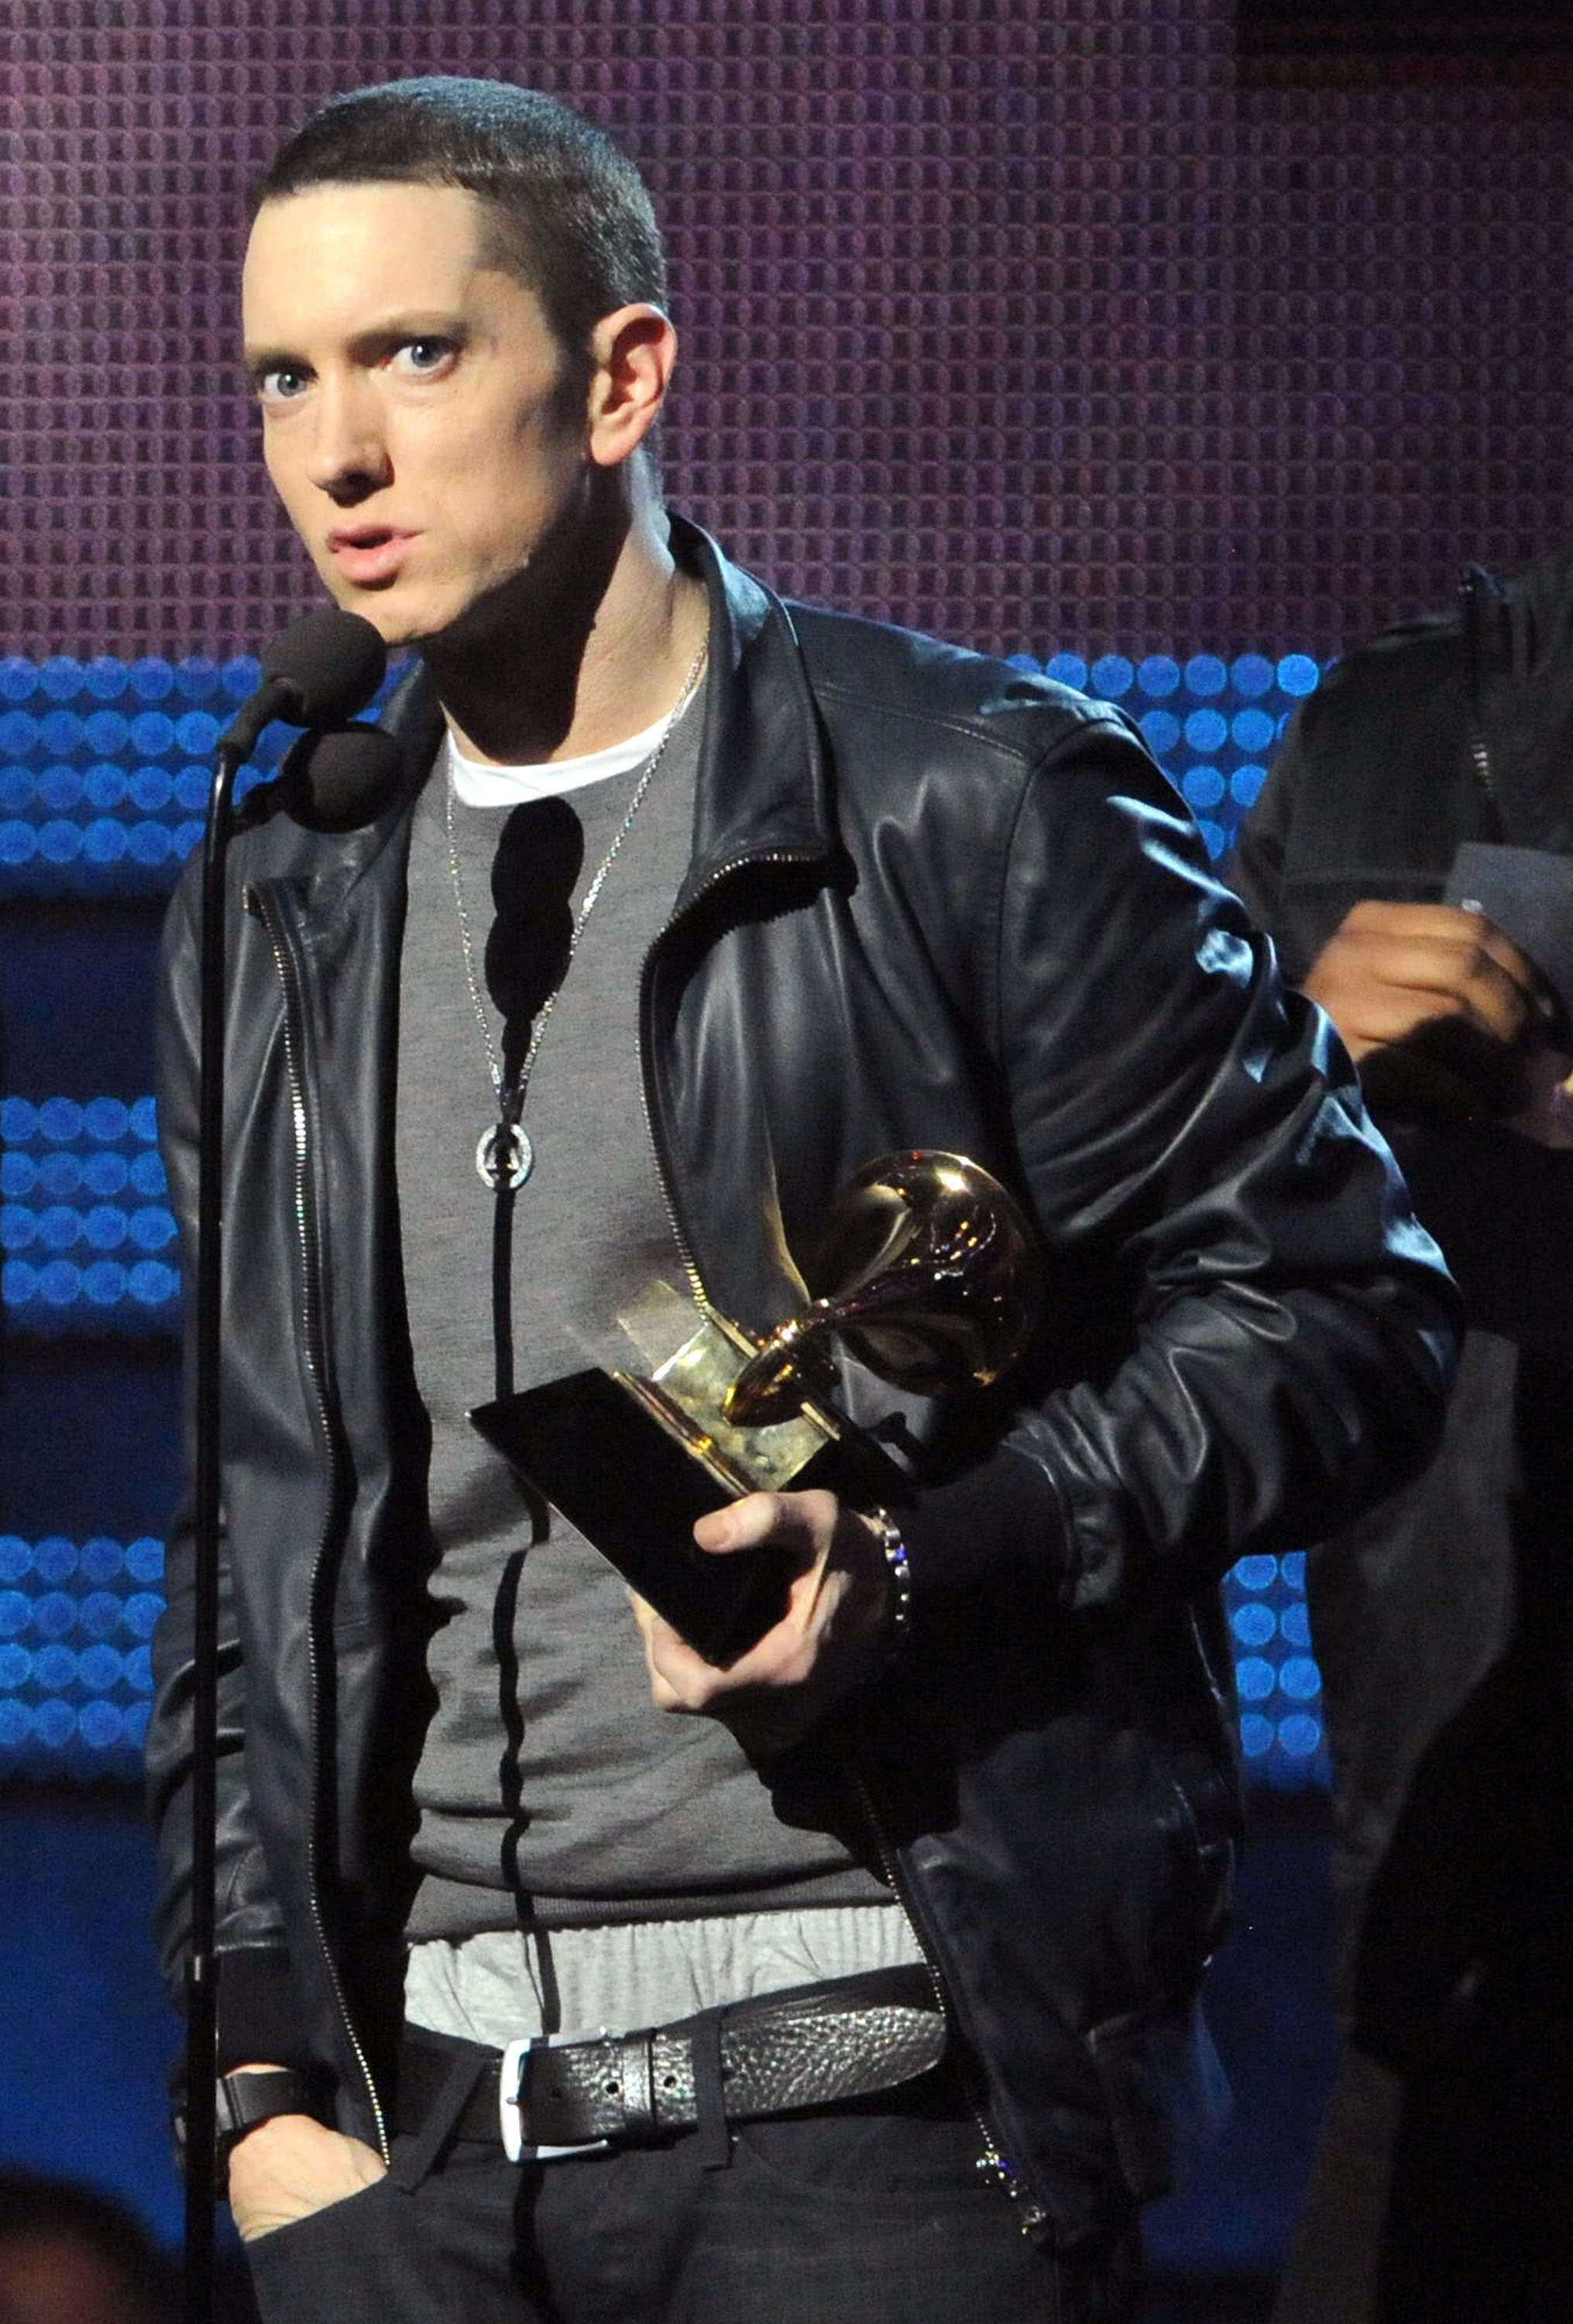 Eminem during the 53rd Annual Grammy Awards on February 13, 2011 in Los Angeles, California | Source: Getty Images